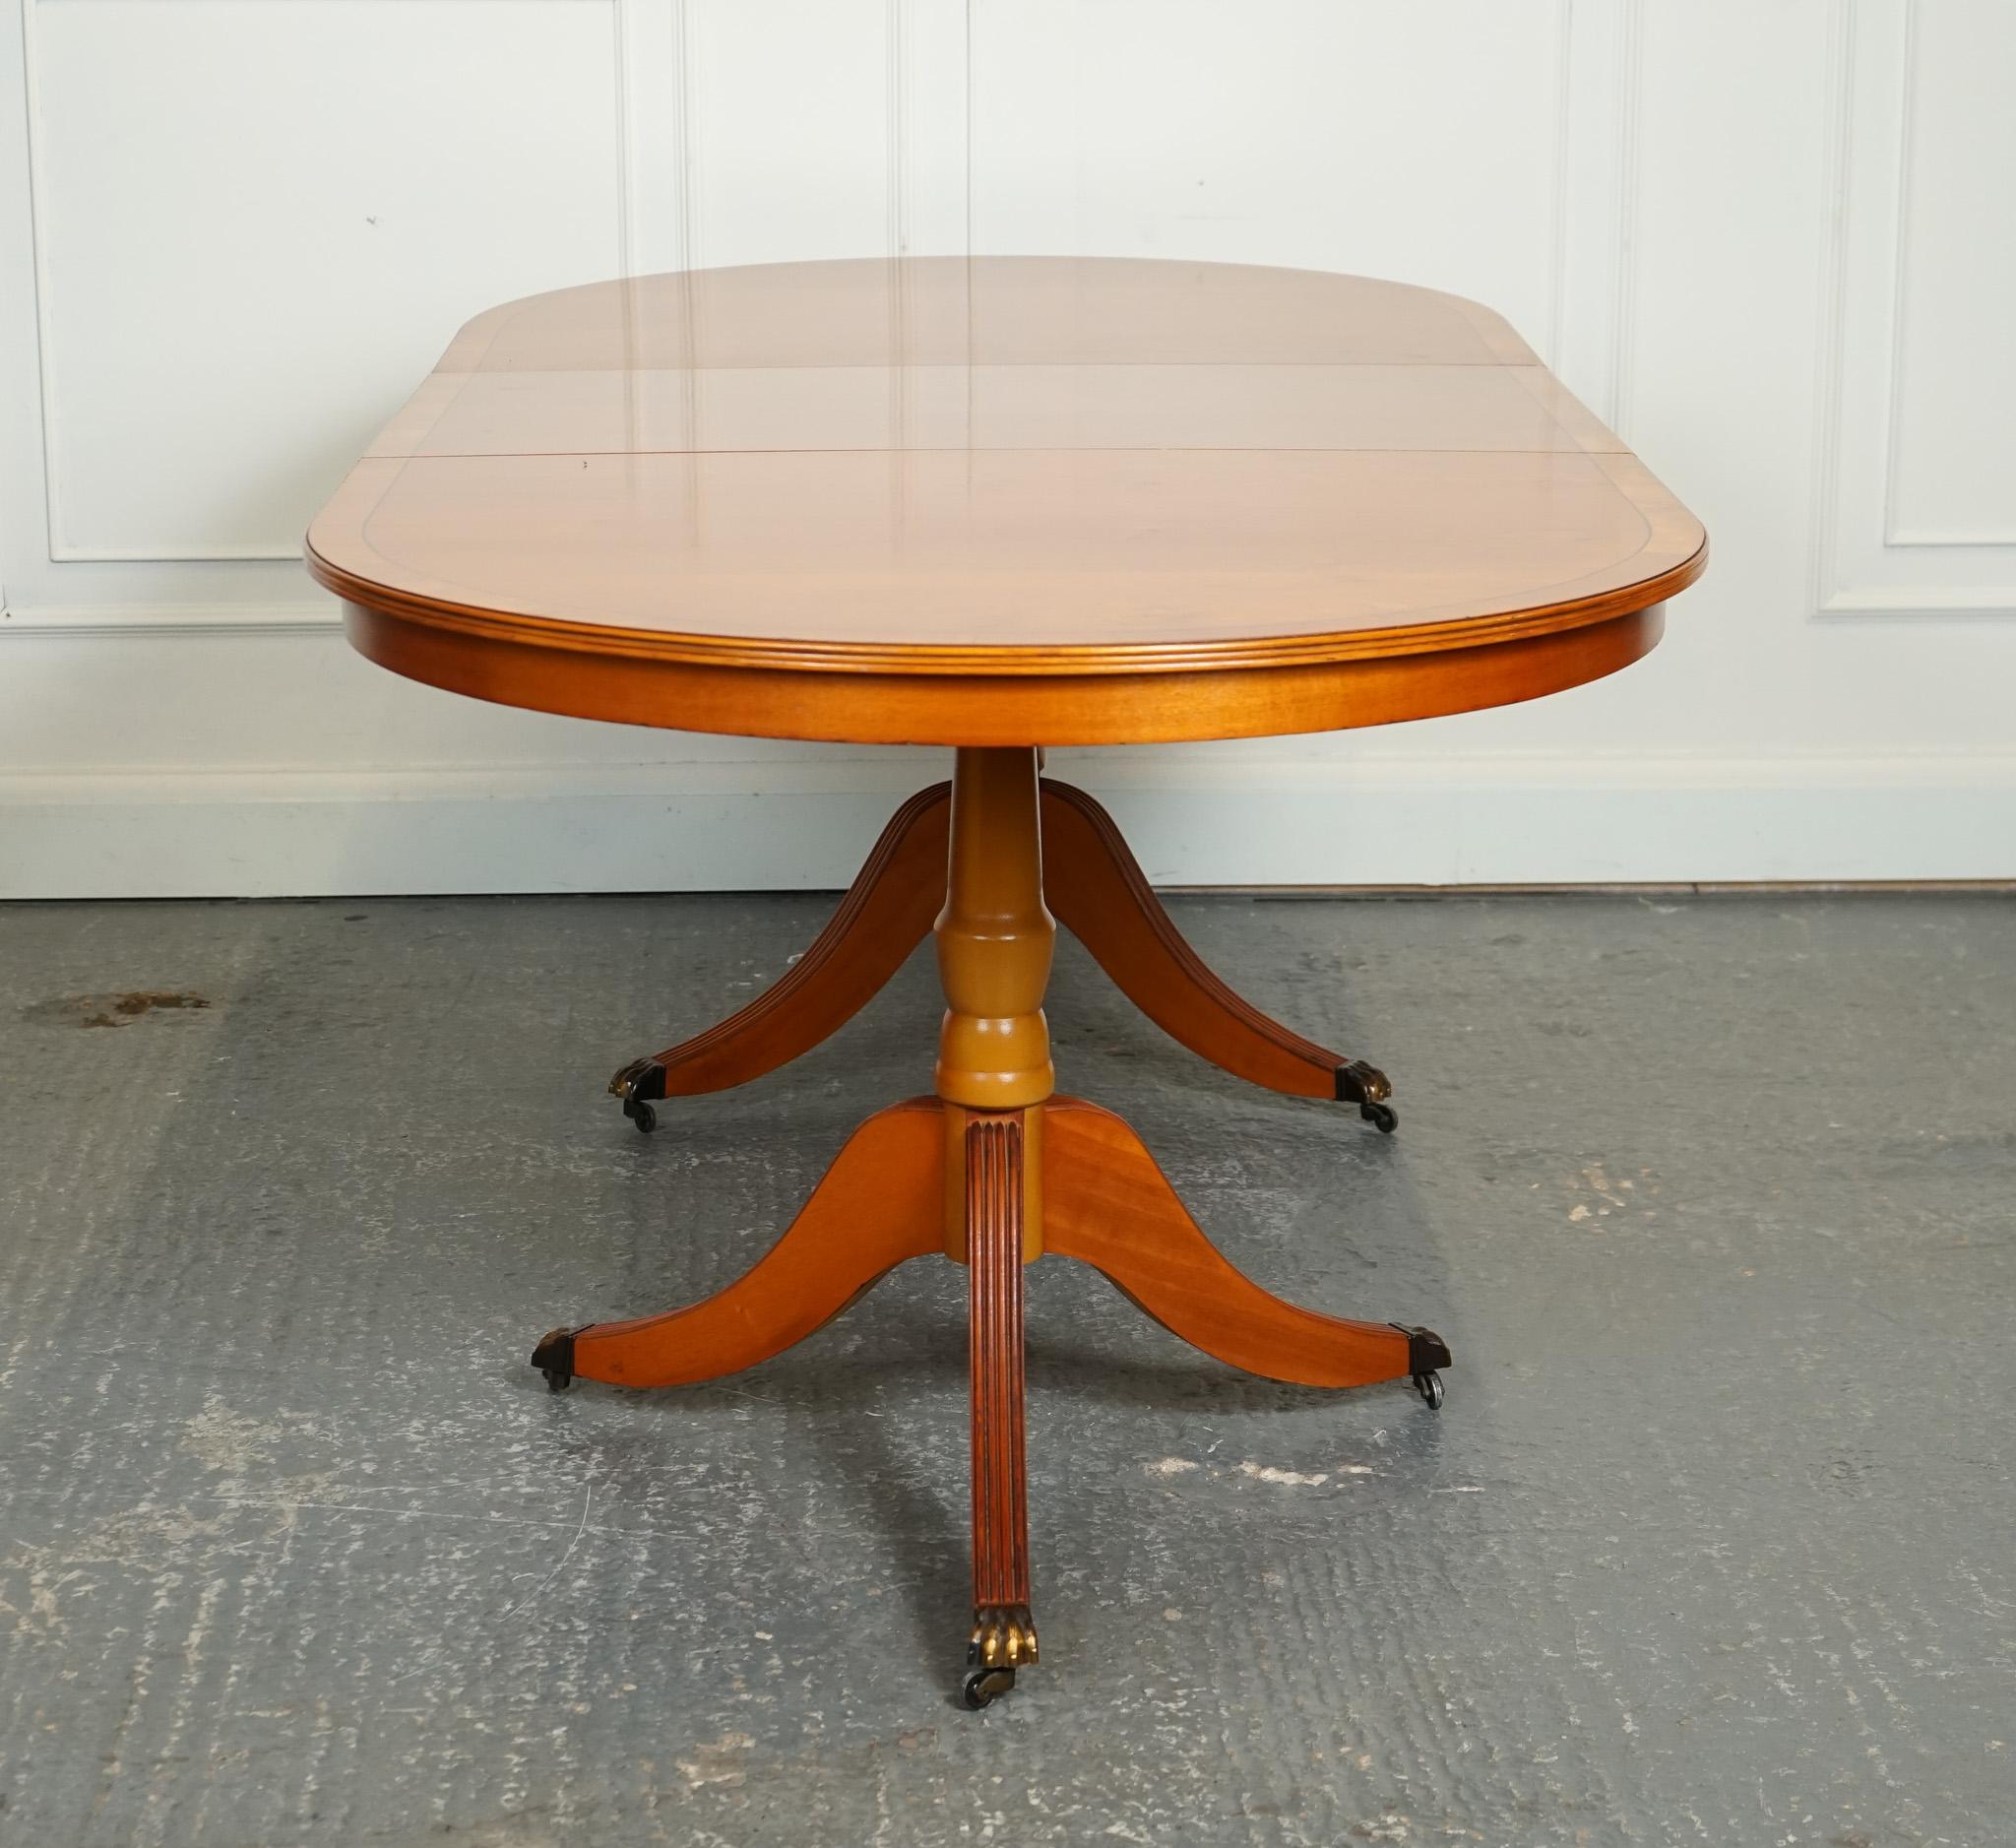 VINTAGE TWIN PEDESTAL YEW WOOD EXTENDING DINiNG TABLE 6 TO 8 Person J1 im Zustand „Gut“ im Angebot in Pulborough, GB